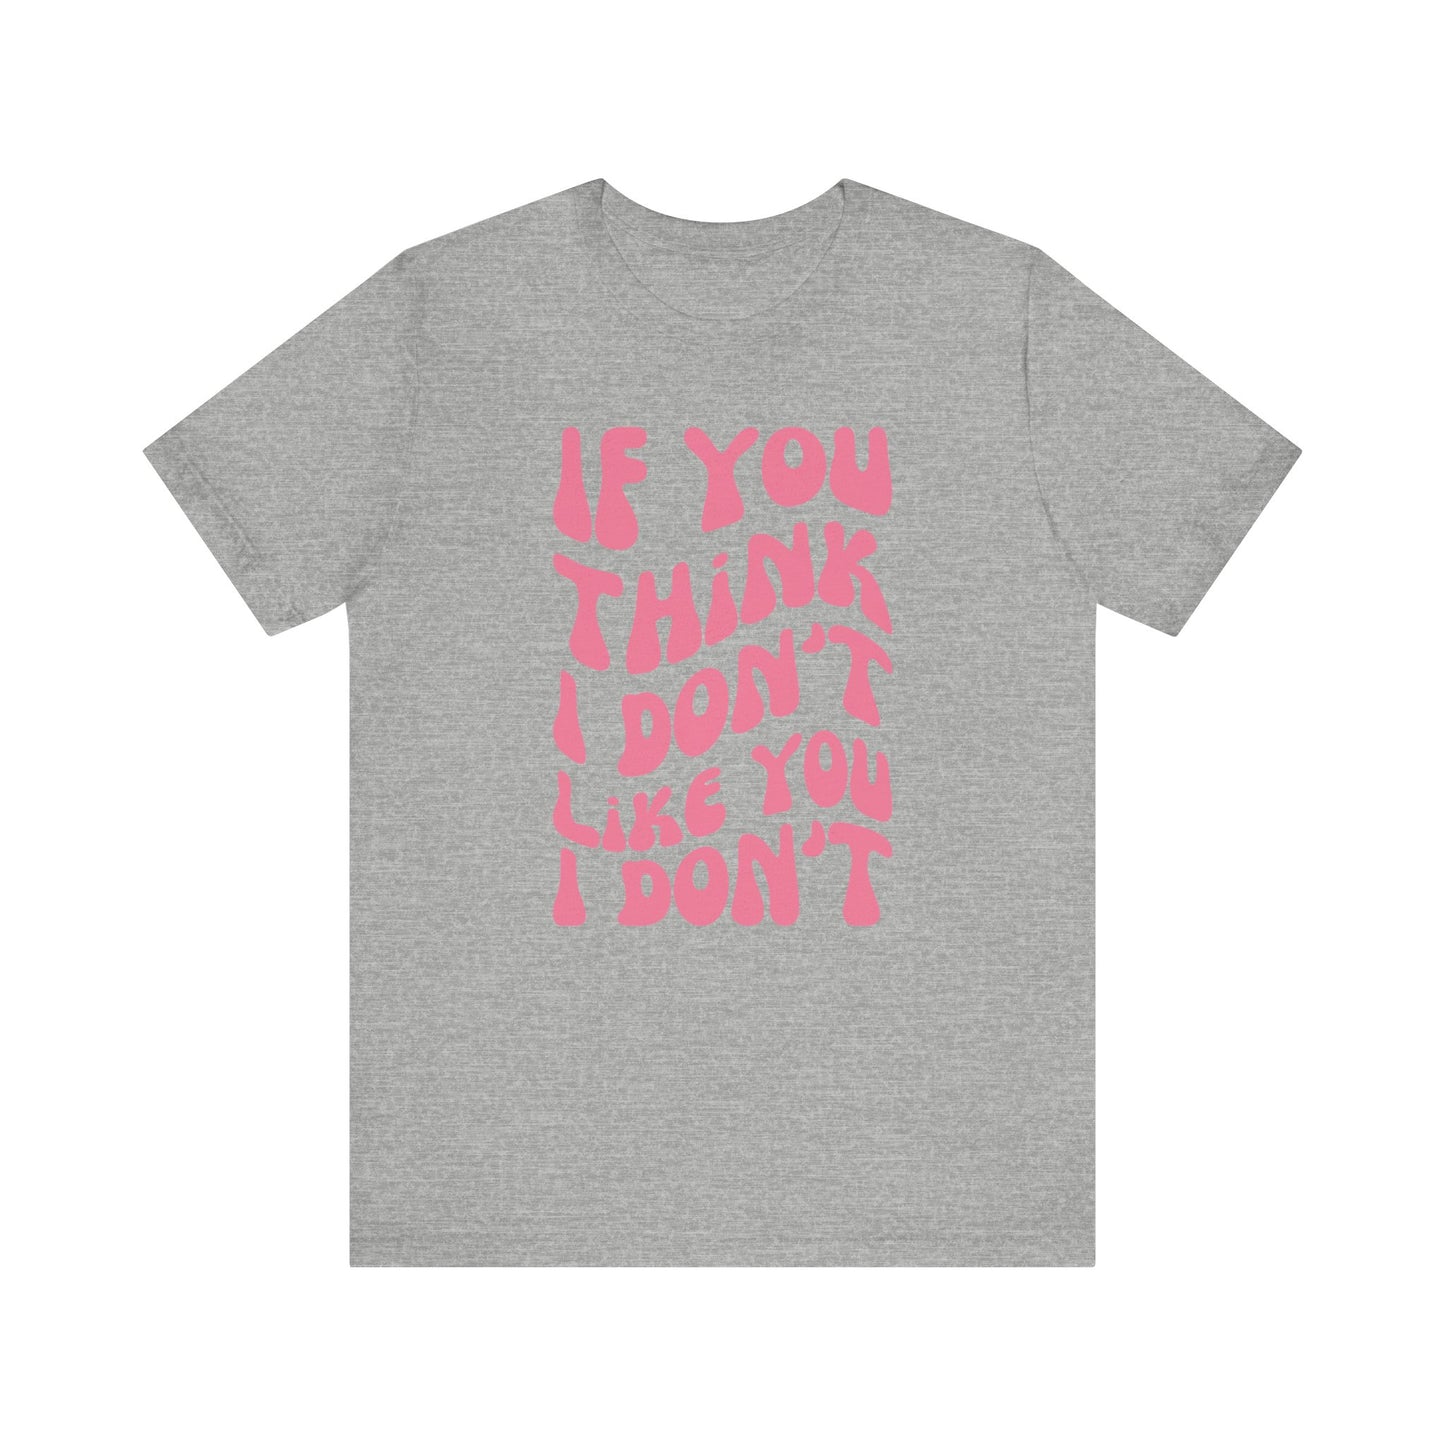 If You Think I Don't Like You I Don't - Pink Font T-Shirt